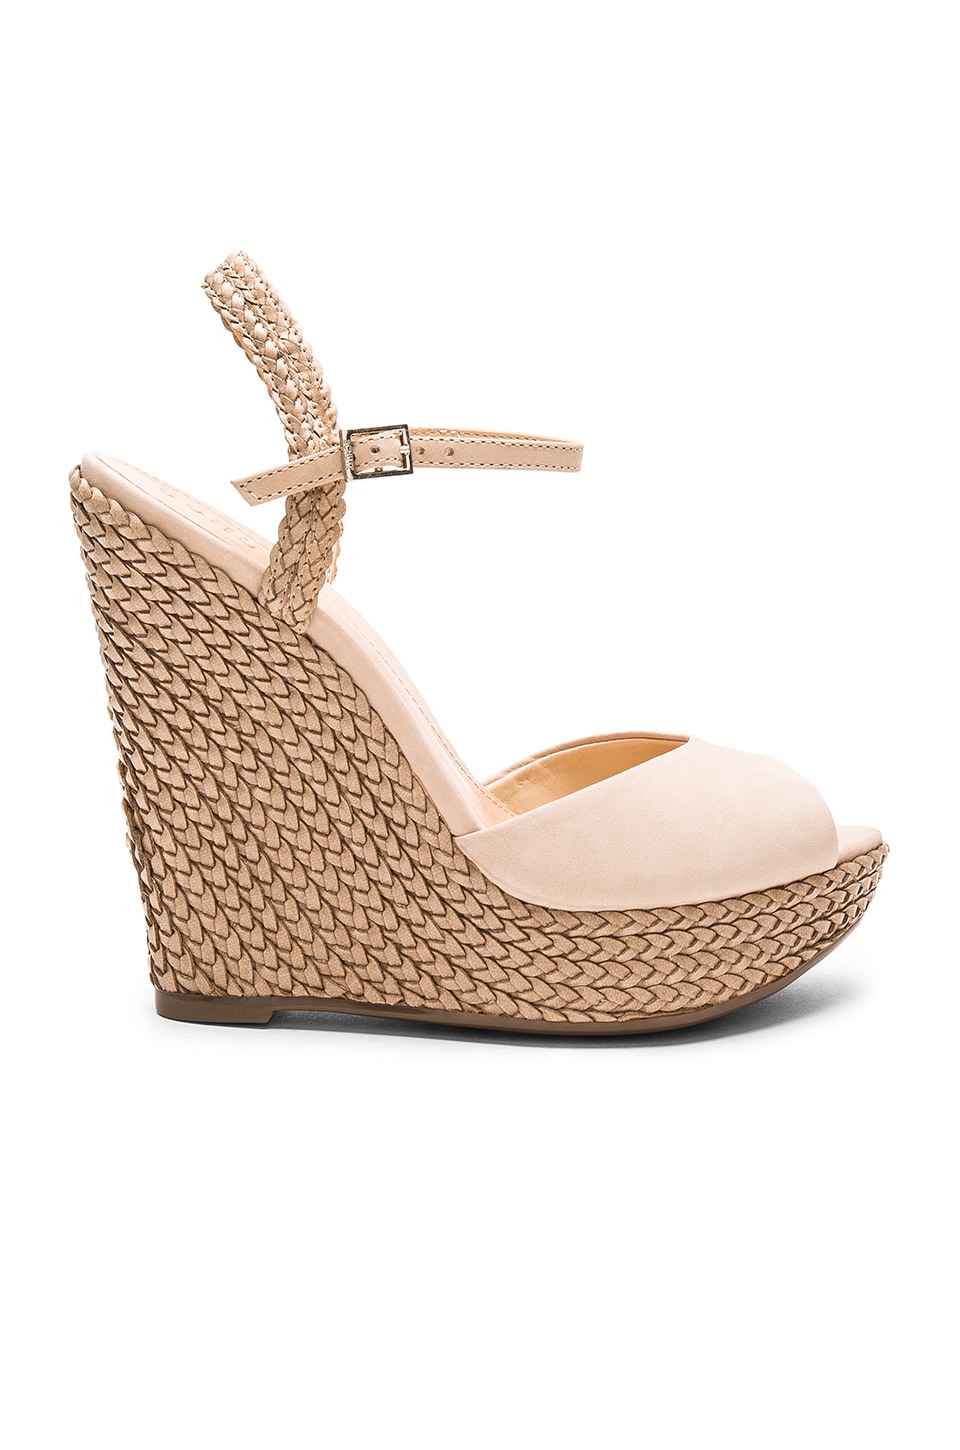 Schutz Mable Wedge in Oyster | REVOLVE